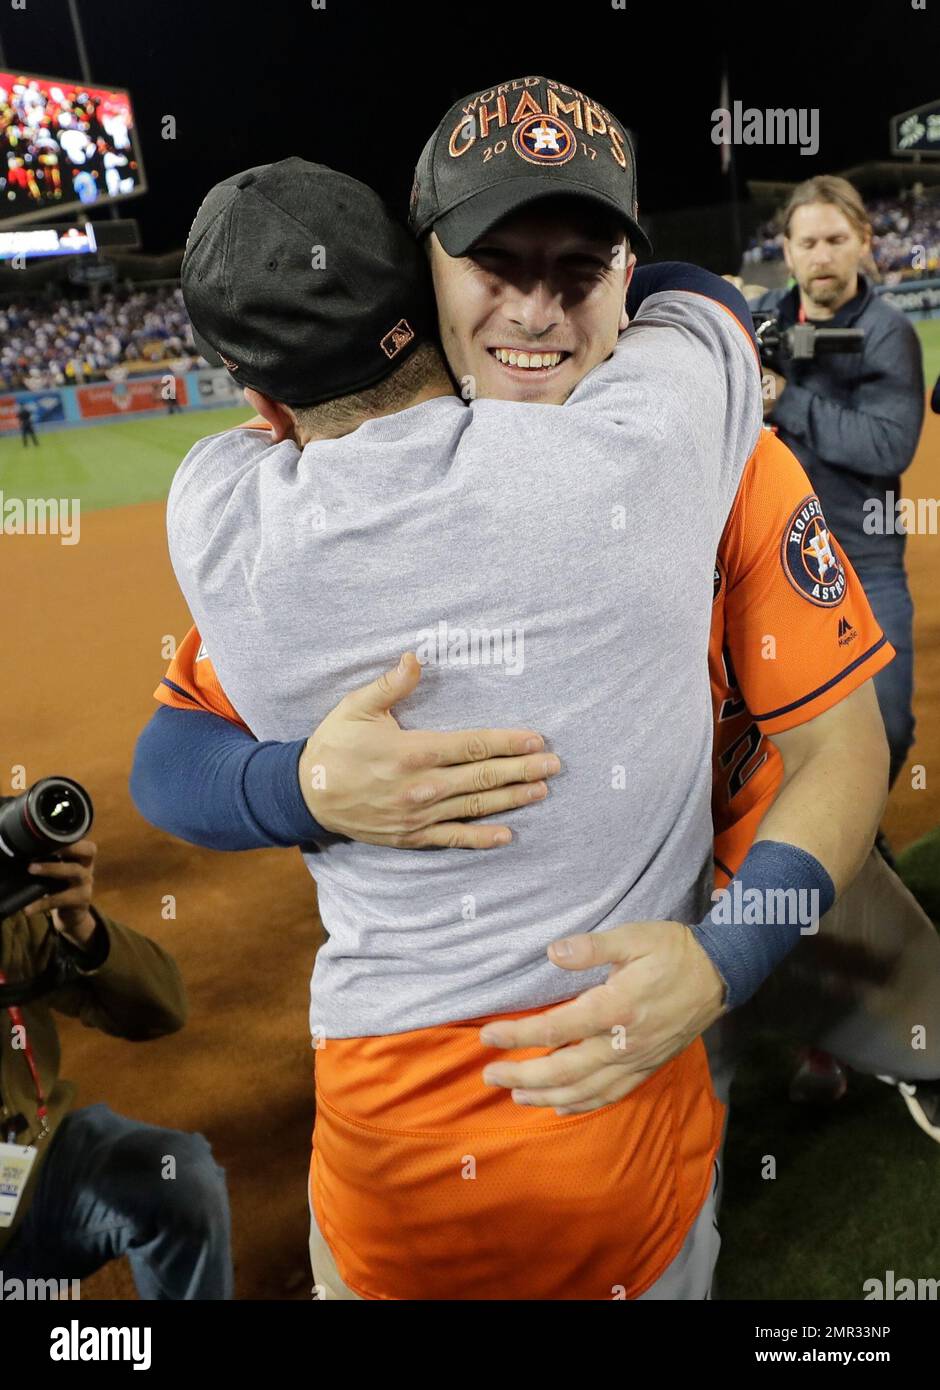 Houston Astros' Jose Altuve and Alex Bregman celebrate after Game 7 of  baseball's World Series against the Los Angeles Dodgers Wednesday, Nov. 1,  2017, in Los Angeles. The Astros won 5-1 to